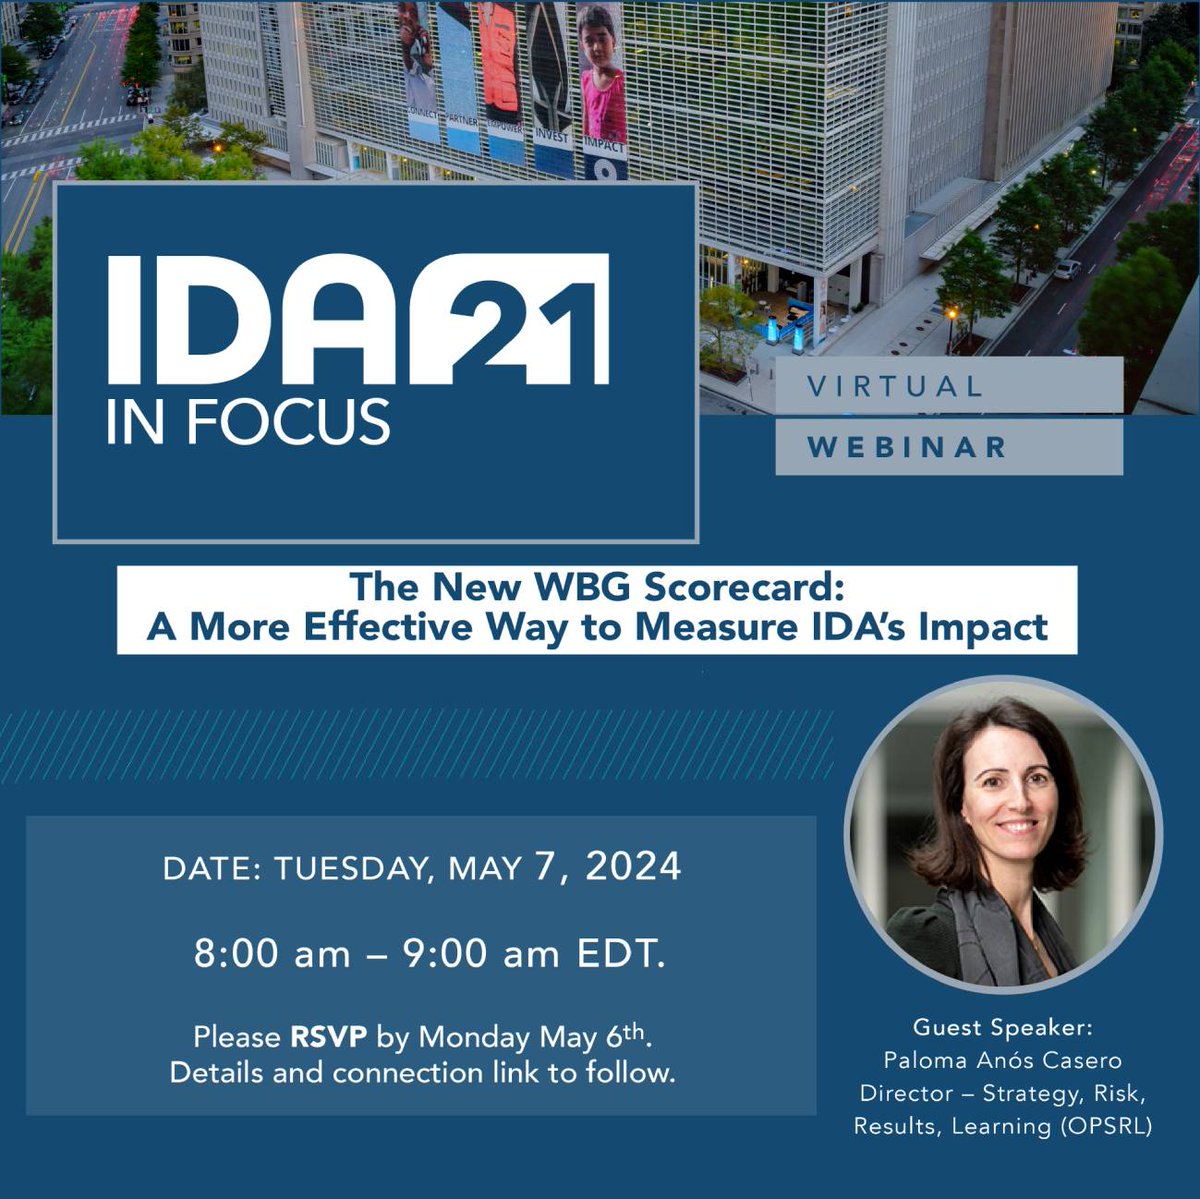 Curious about the new @WorldBank Corporate Scorecard and how it will measure IDA's impact? Join us for the next #IDAinFocus🔭 Webinar featuring guest speaker, Paloma Anos Casero. 🗣️Register today! wrld.bg/VemF50Rugjm 📅 Tues, May 7 ⏰8:00 am EDT #IDAworks #IDA21